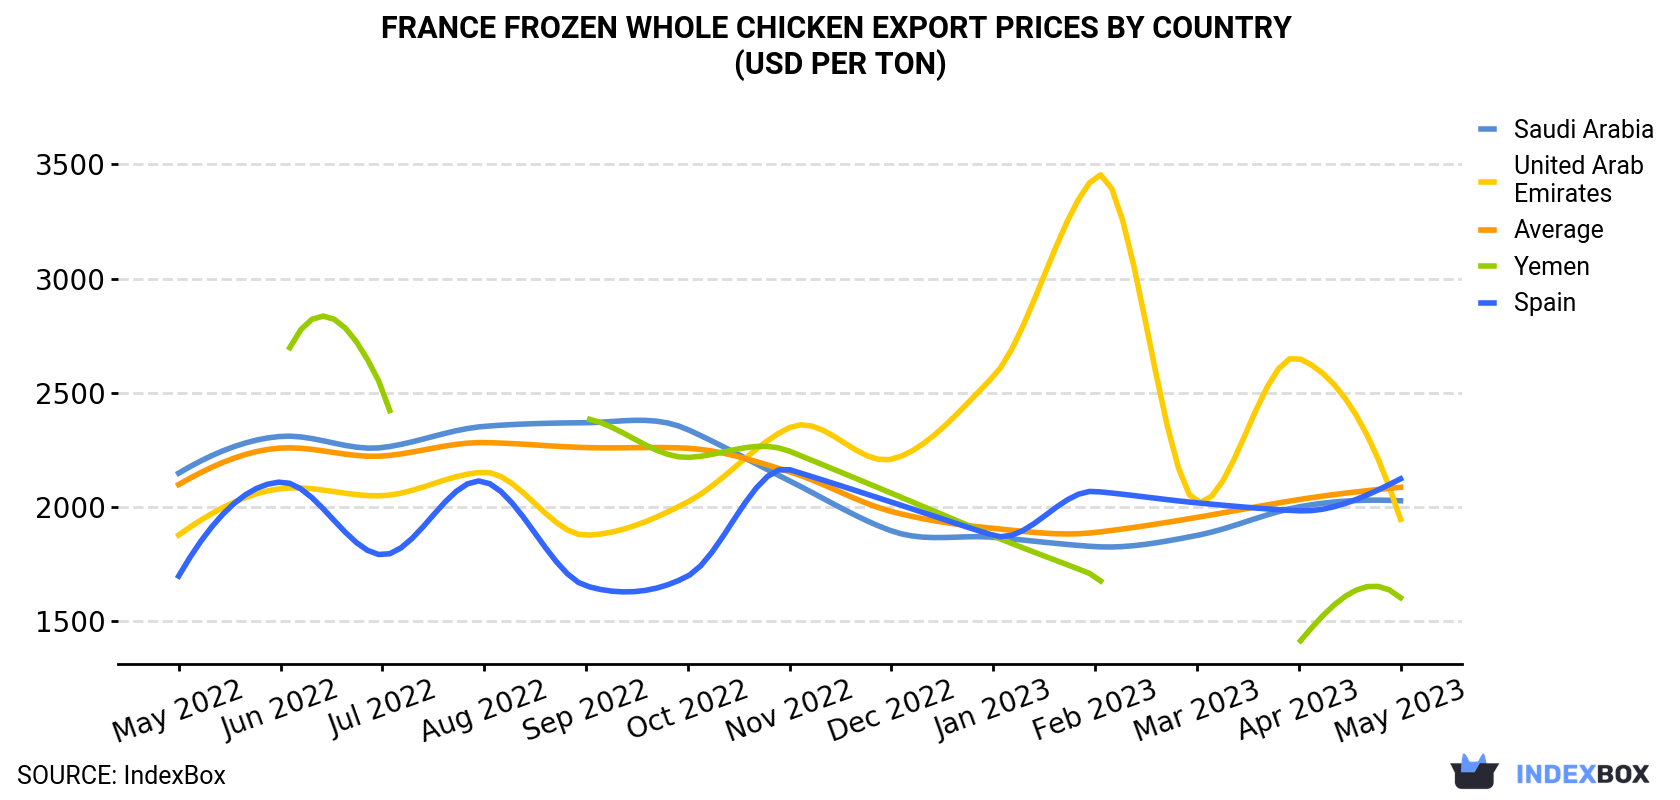 France Frozen Whole Chicken Export Prices By Country (USD Per Ton)